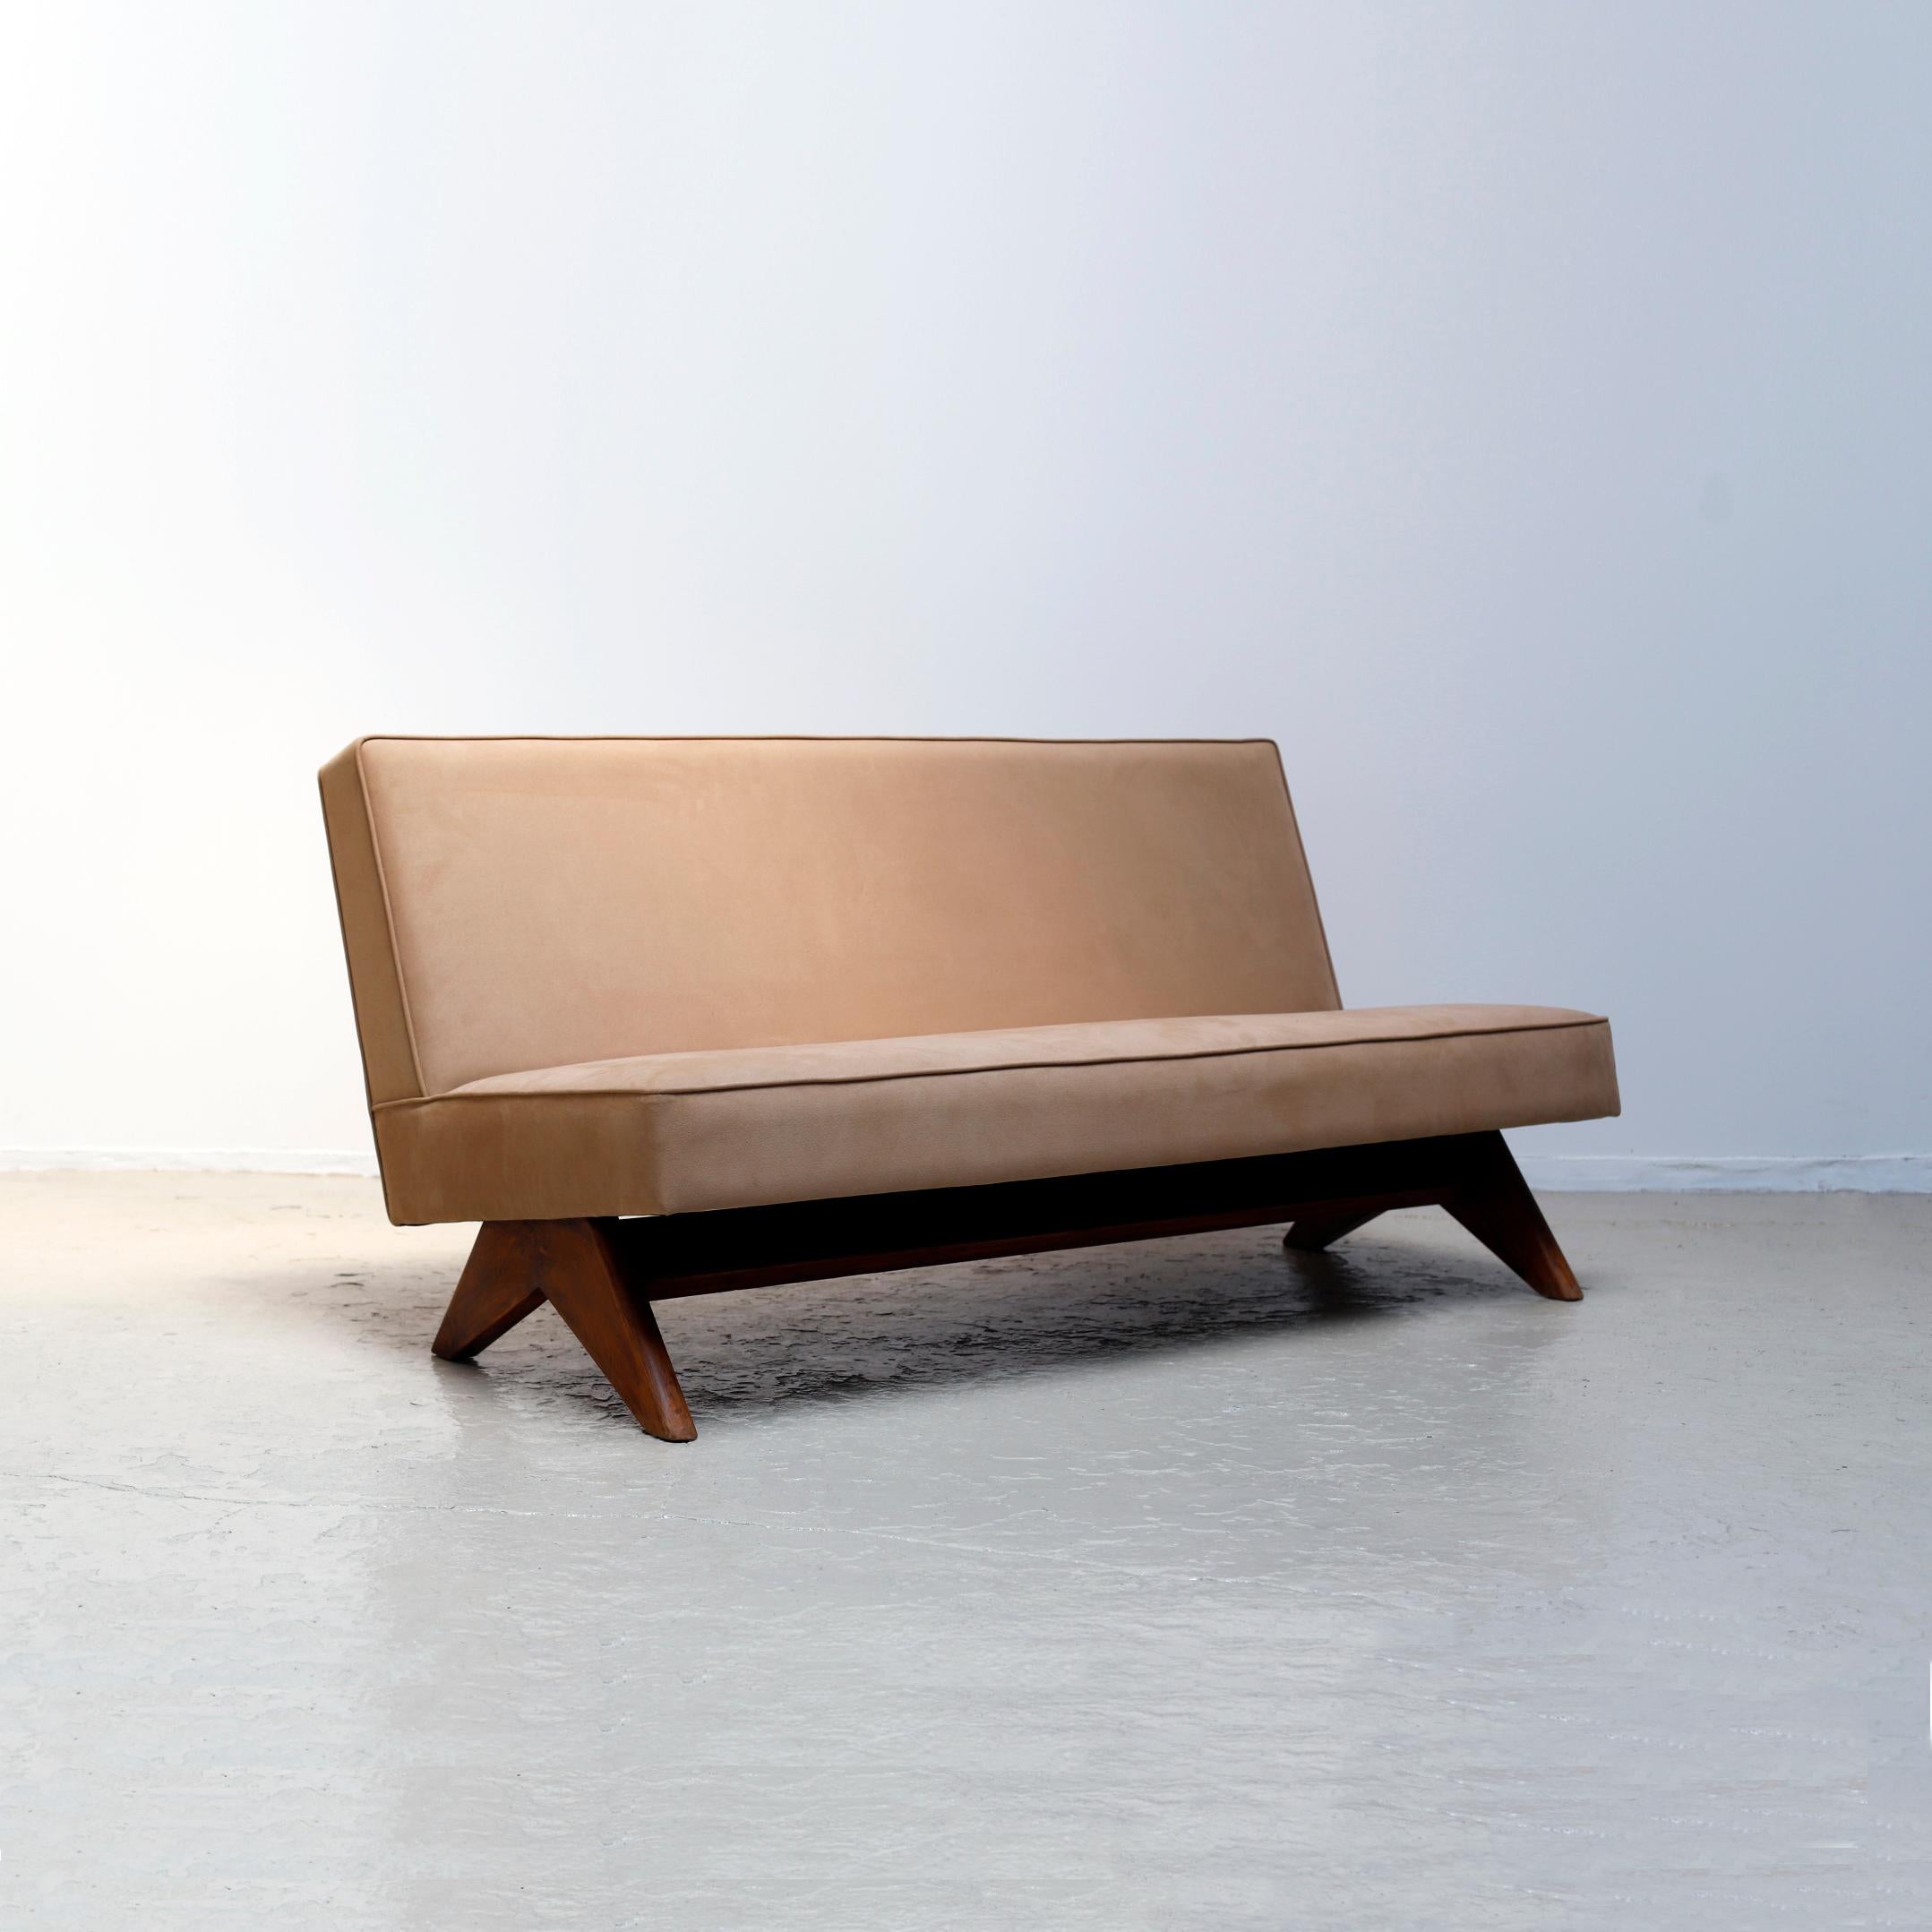 Armless sofa designed by Pierre Jeanneret for Chandigarh project.
Reupholstered with the faux suede in nude color.